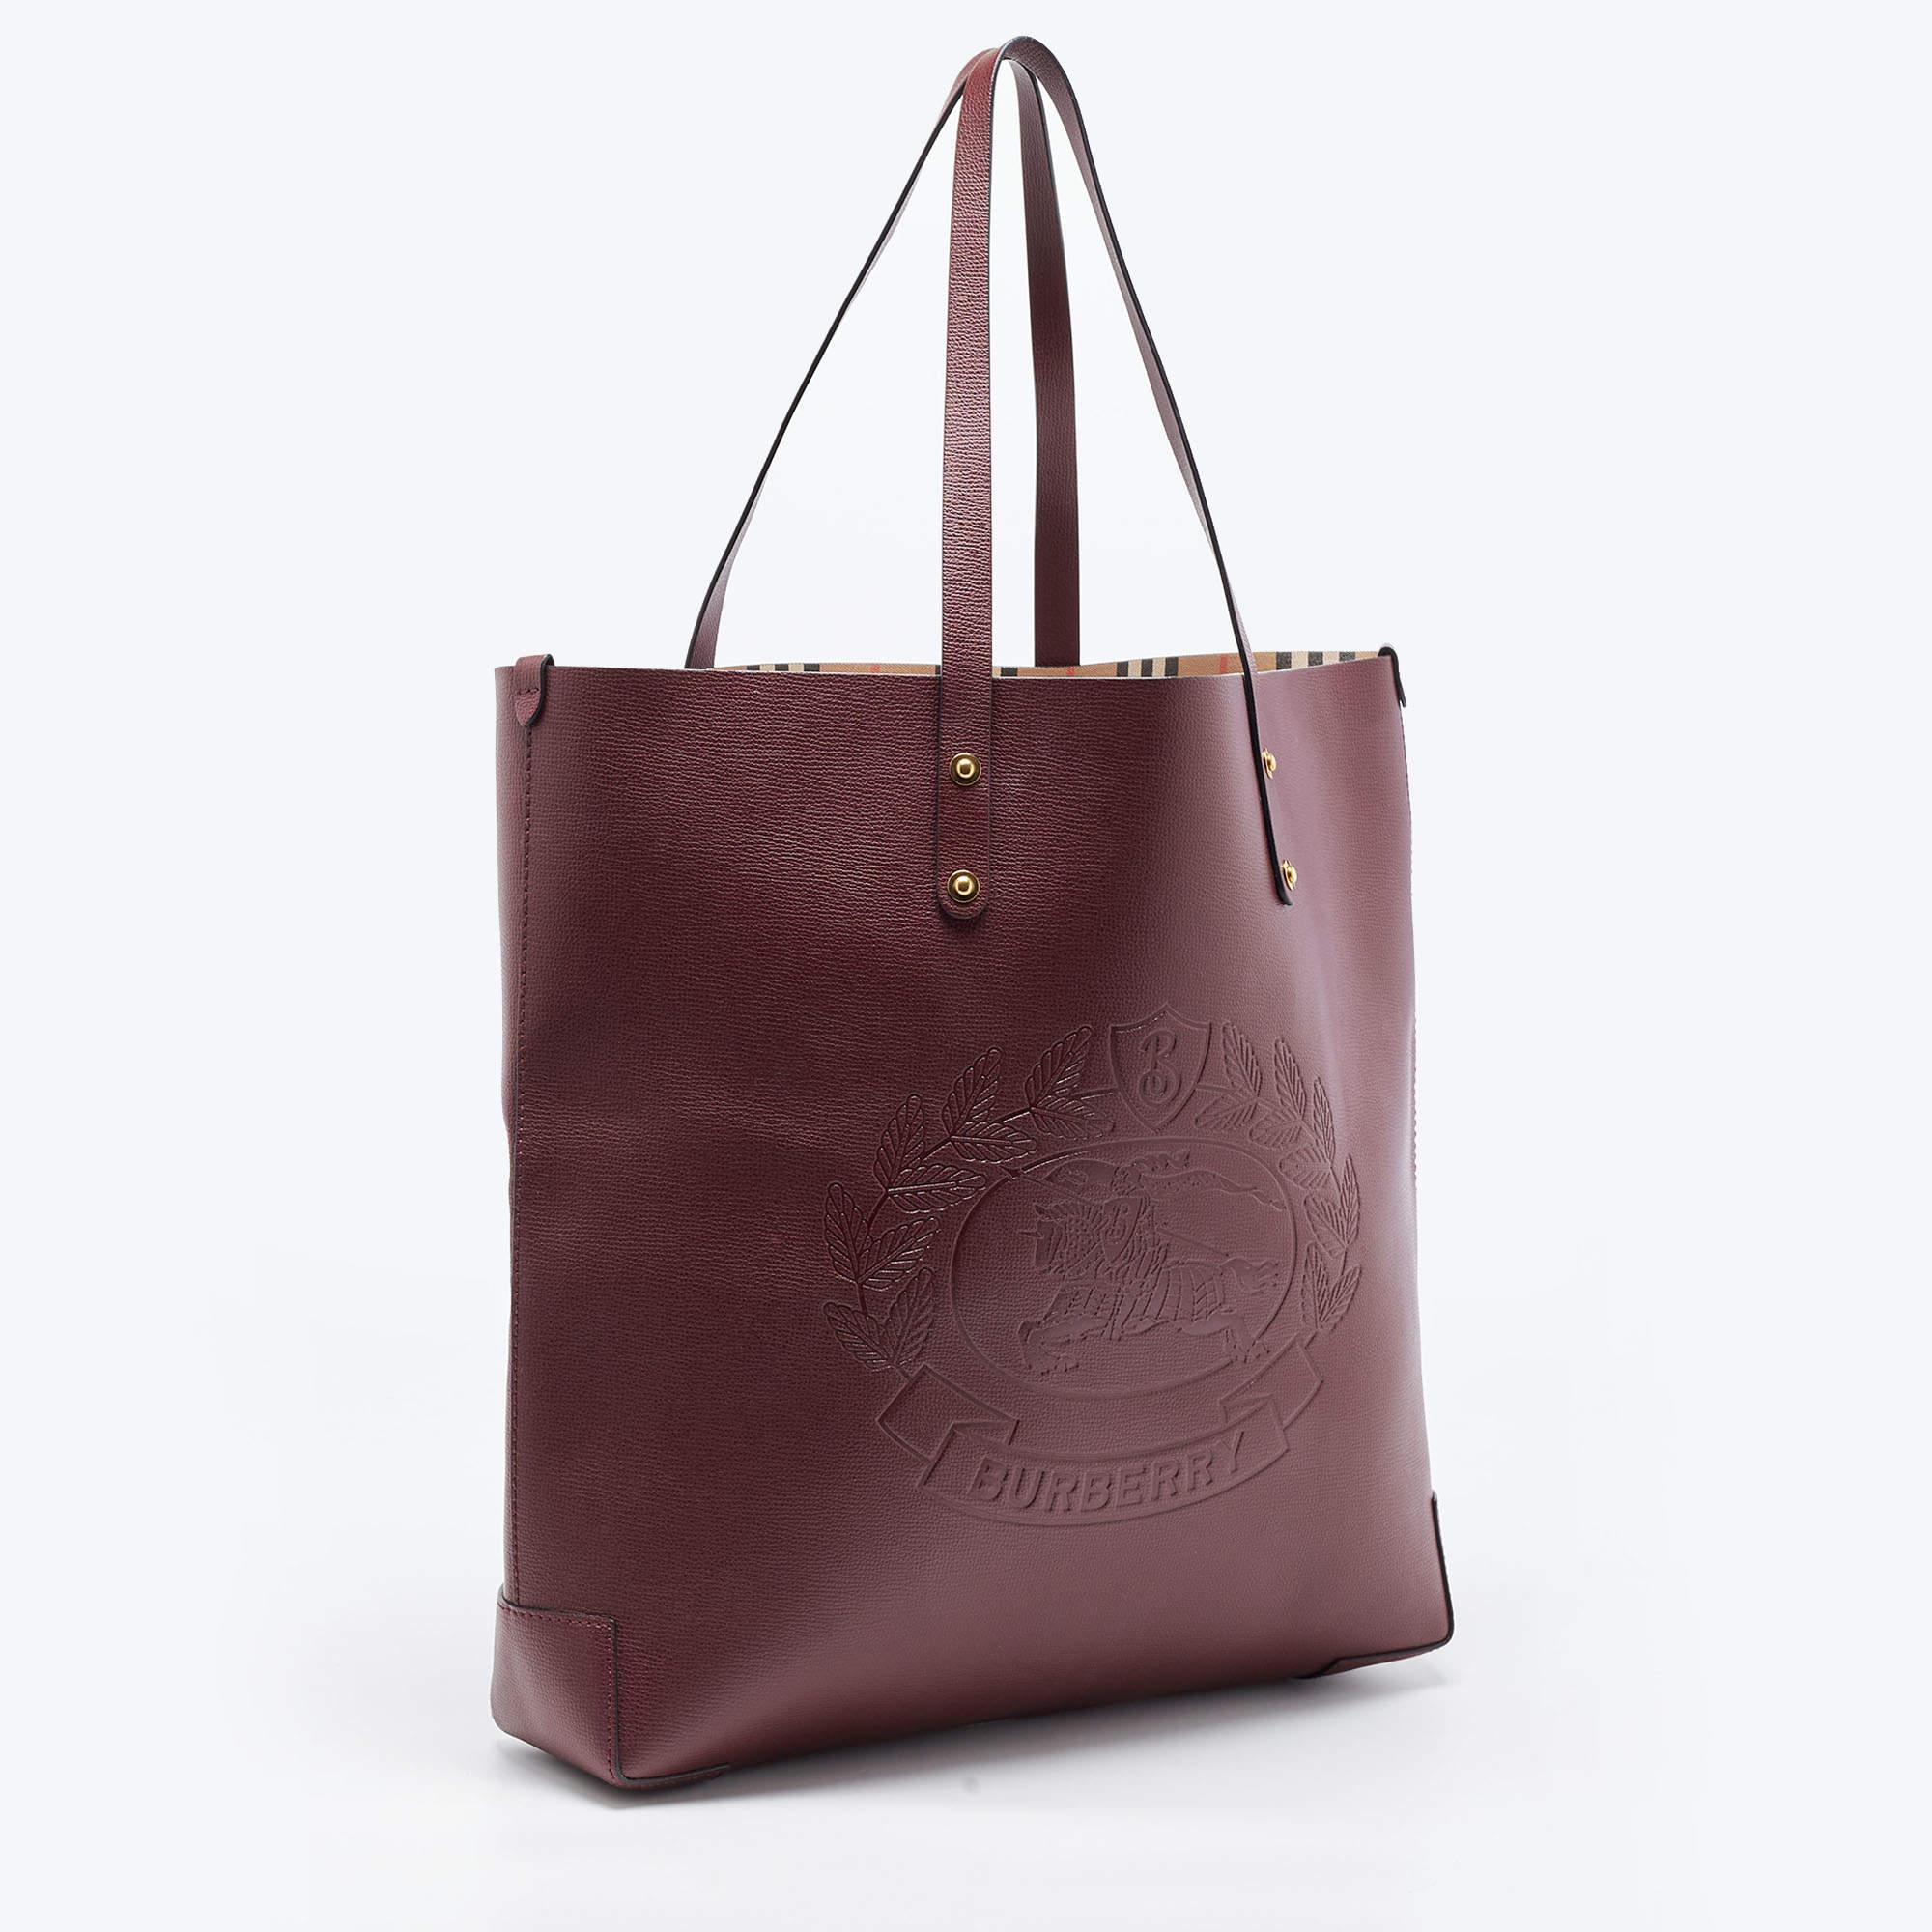 Burberry Burgundy Leather Large Embossed Crest Tote 5